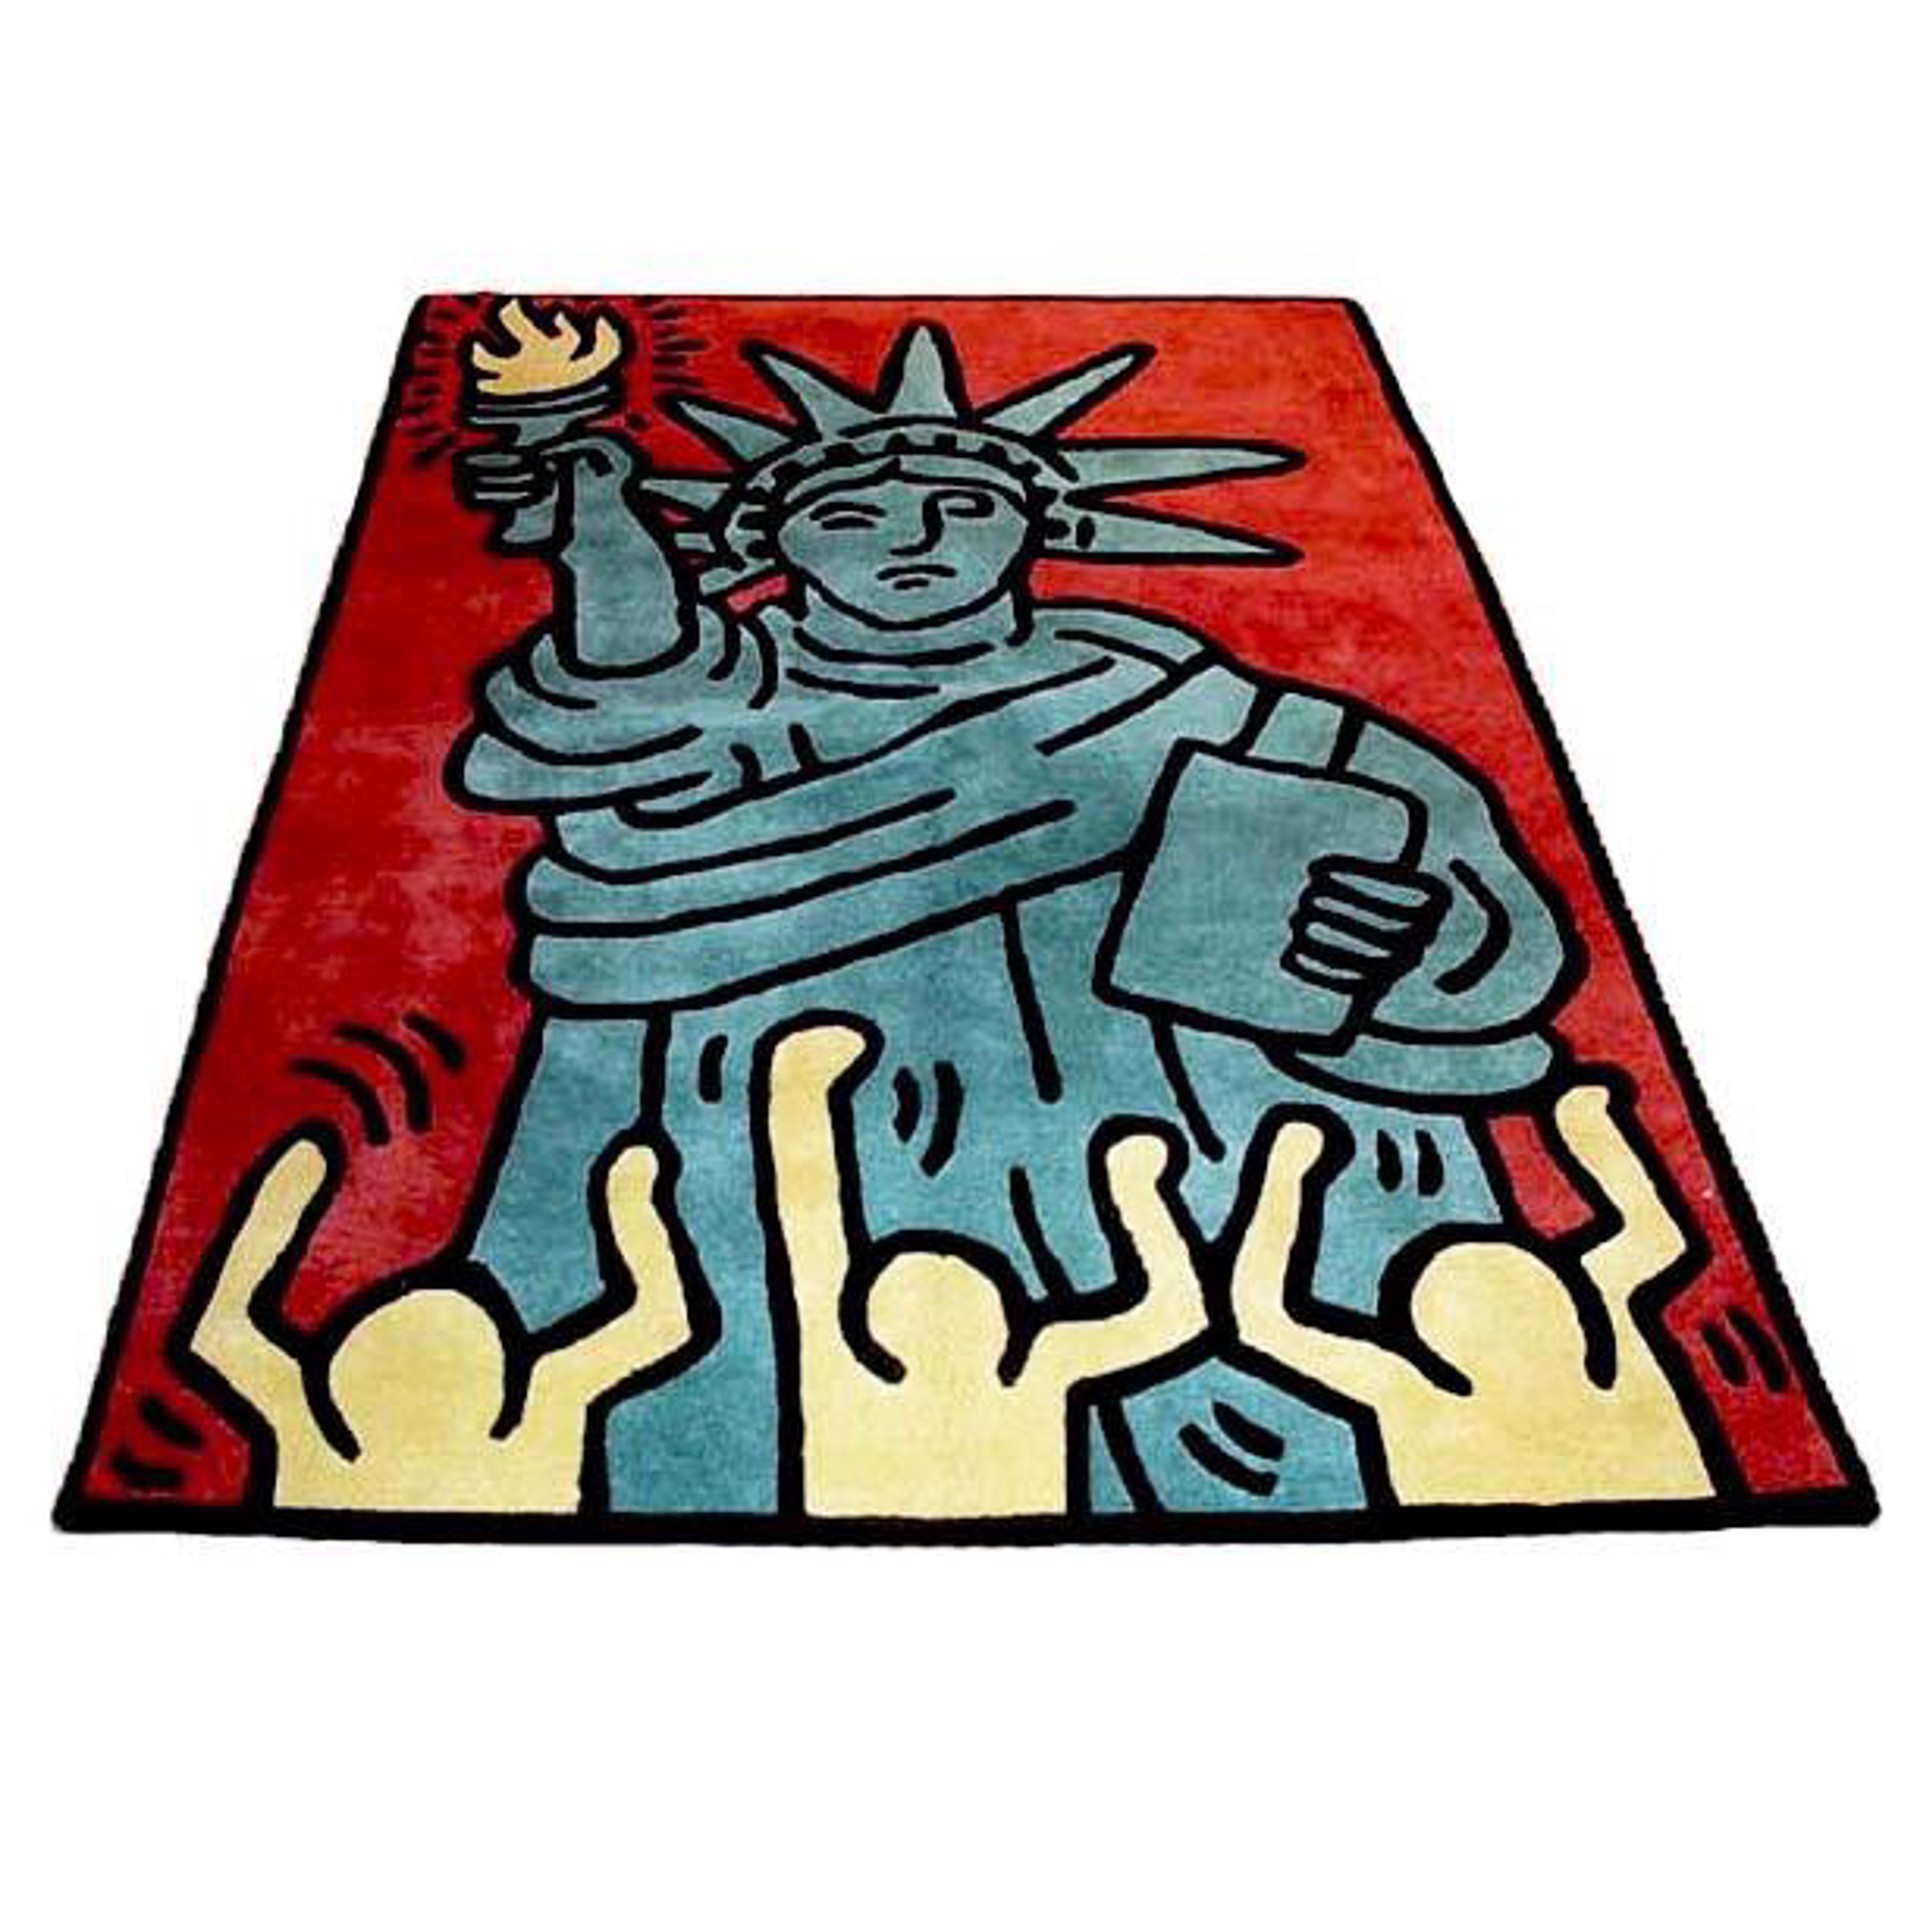 Statue of Liberty Rug by Keith Haring